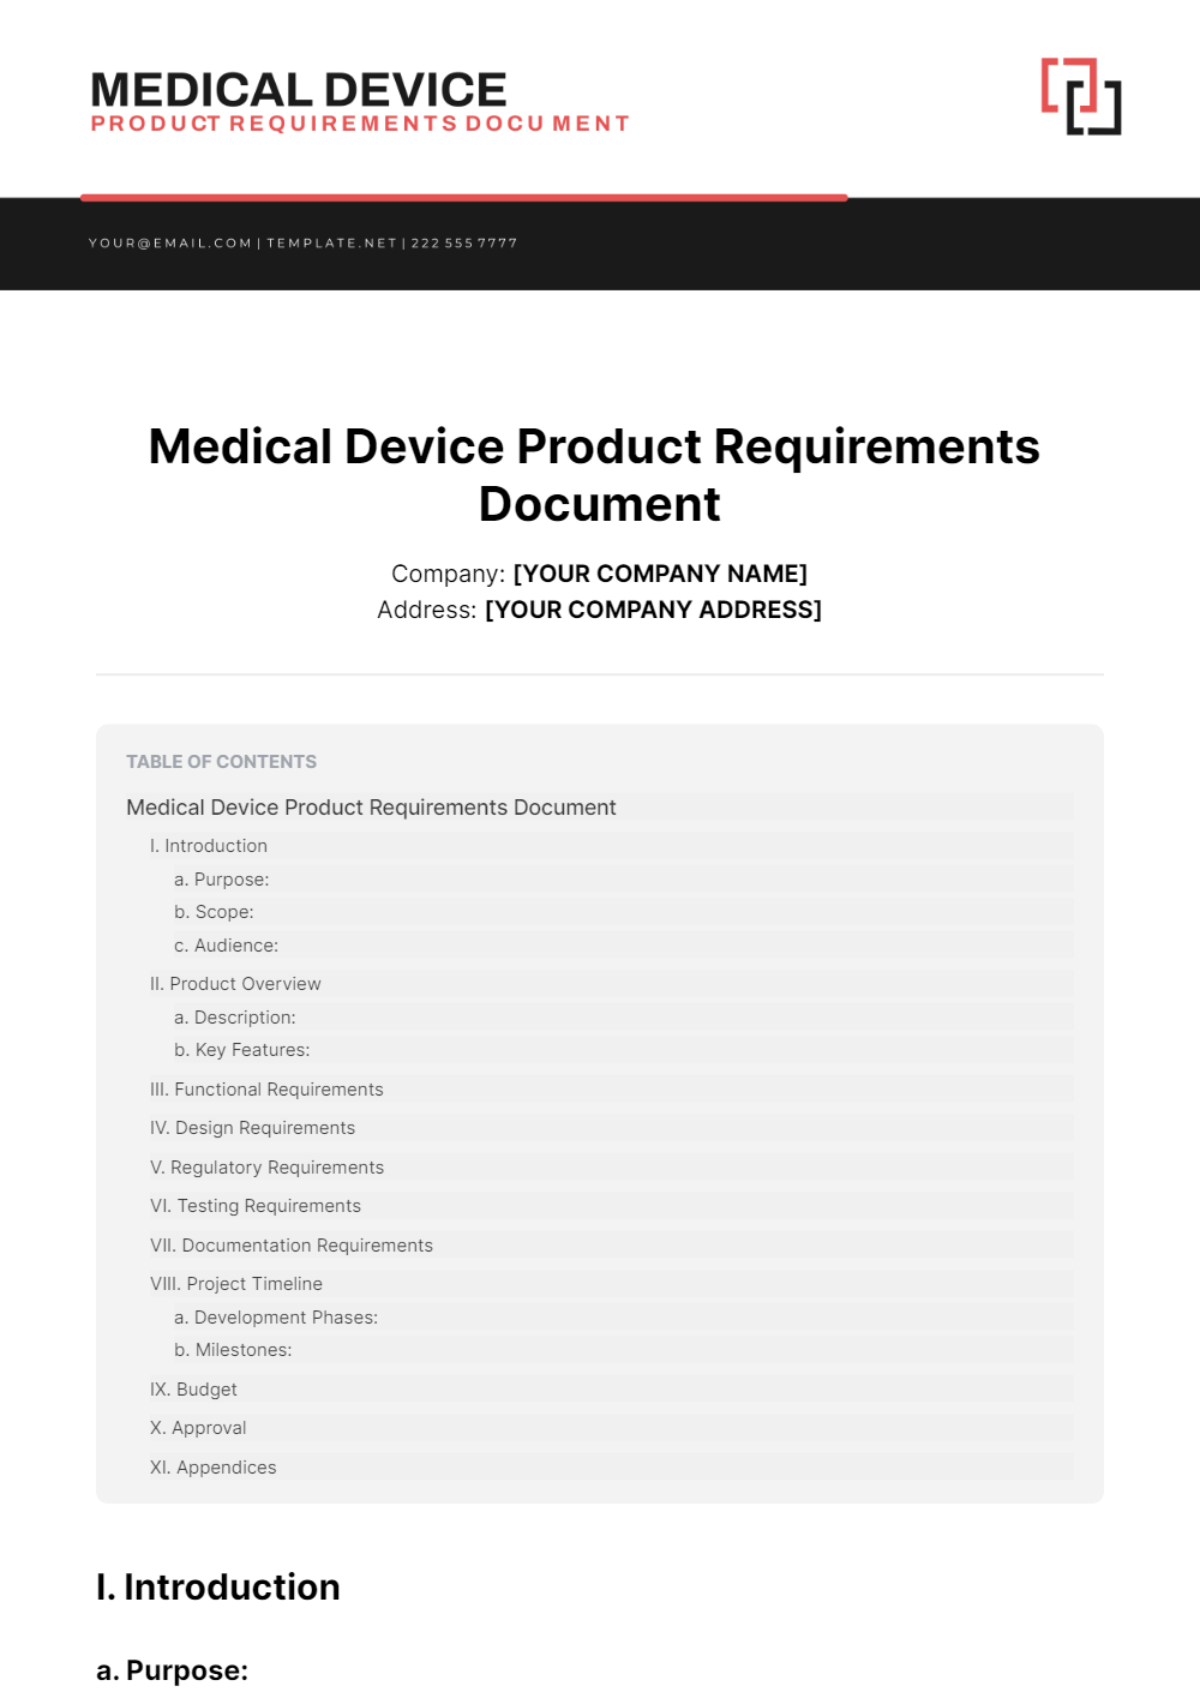 Medical Device Product Requirements Document Template